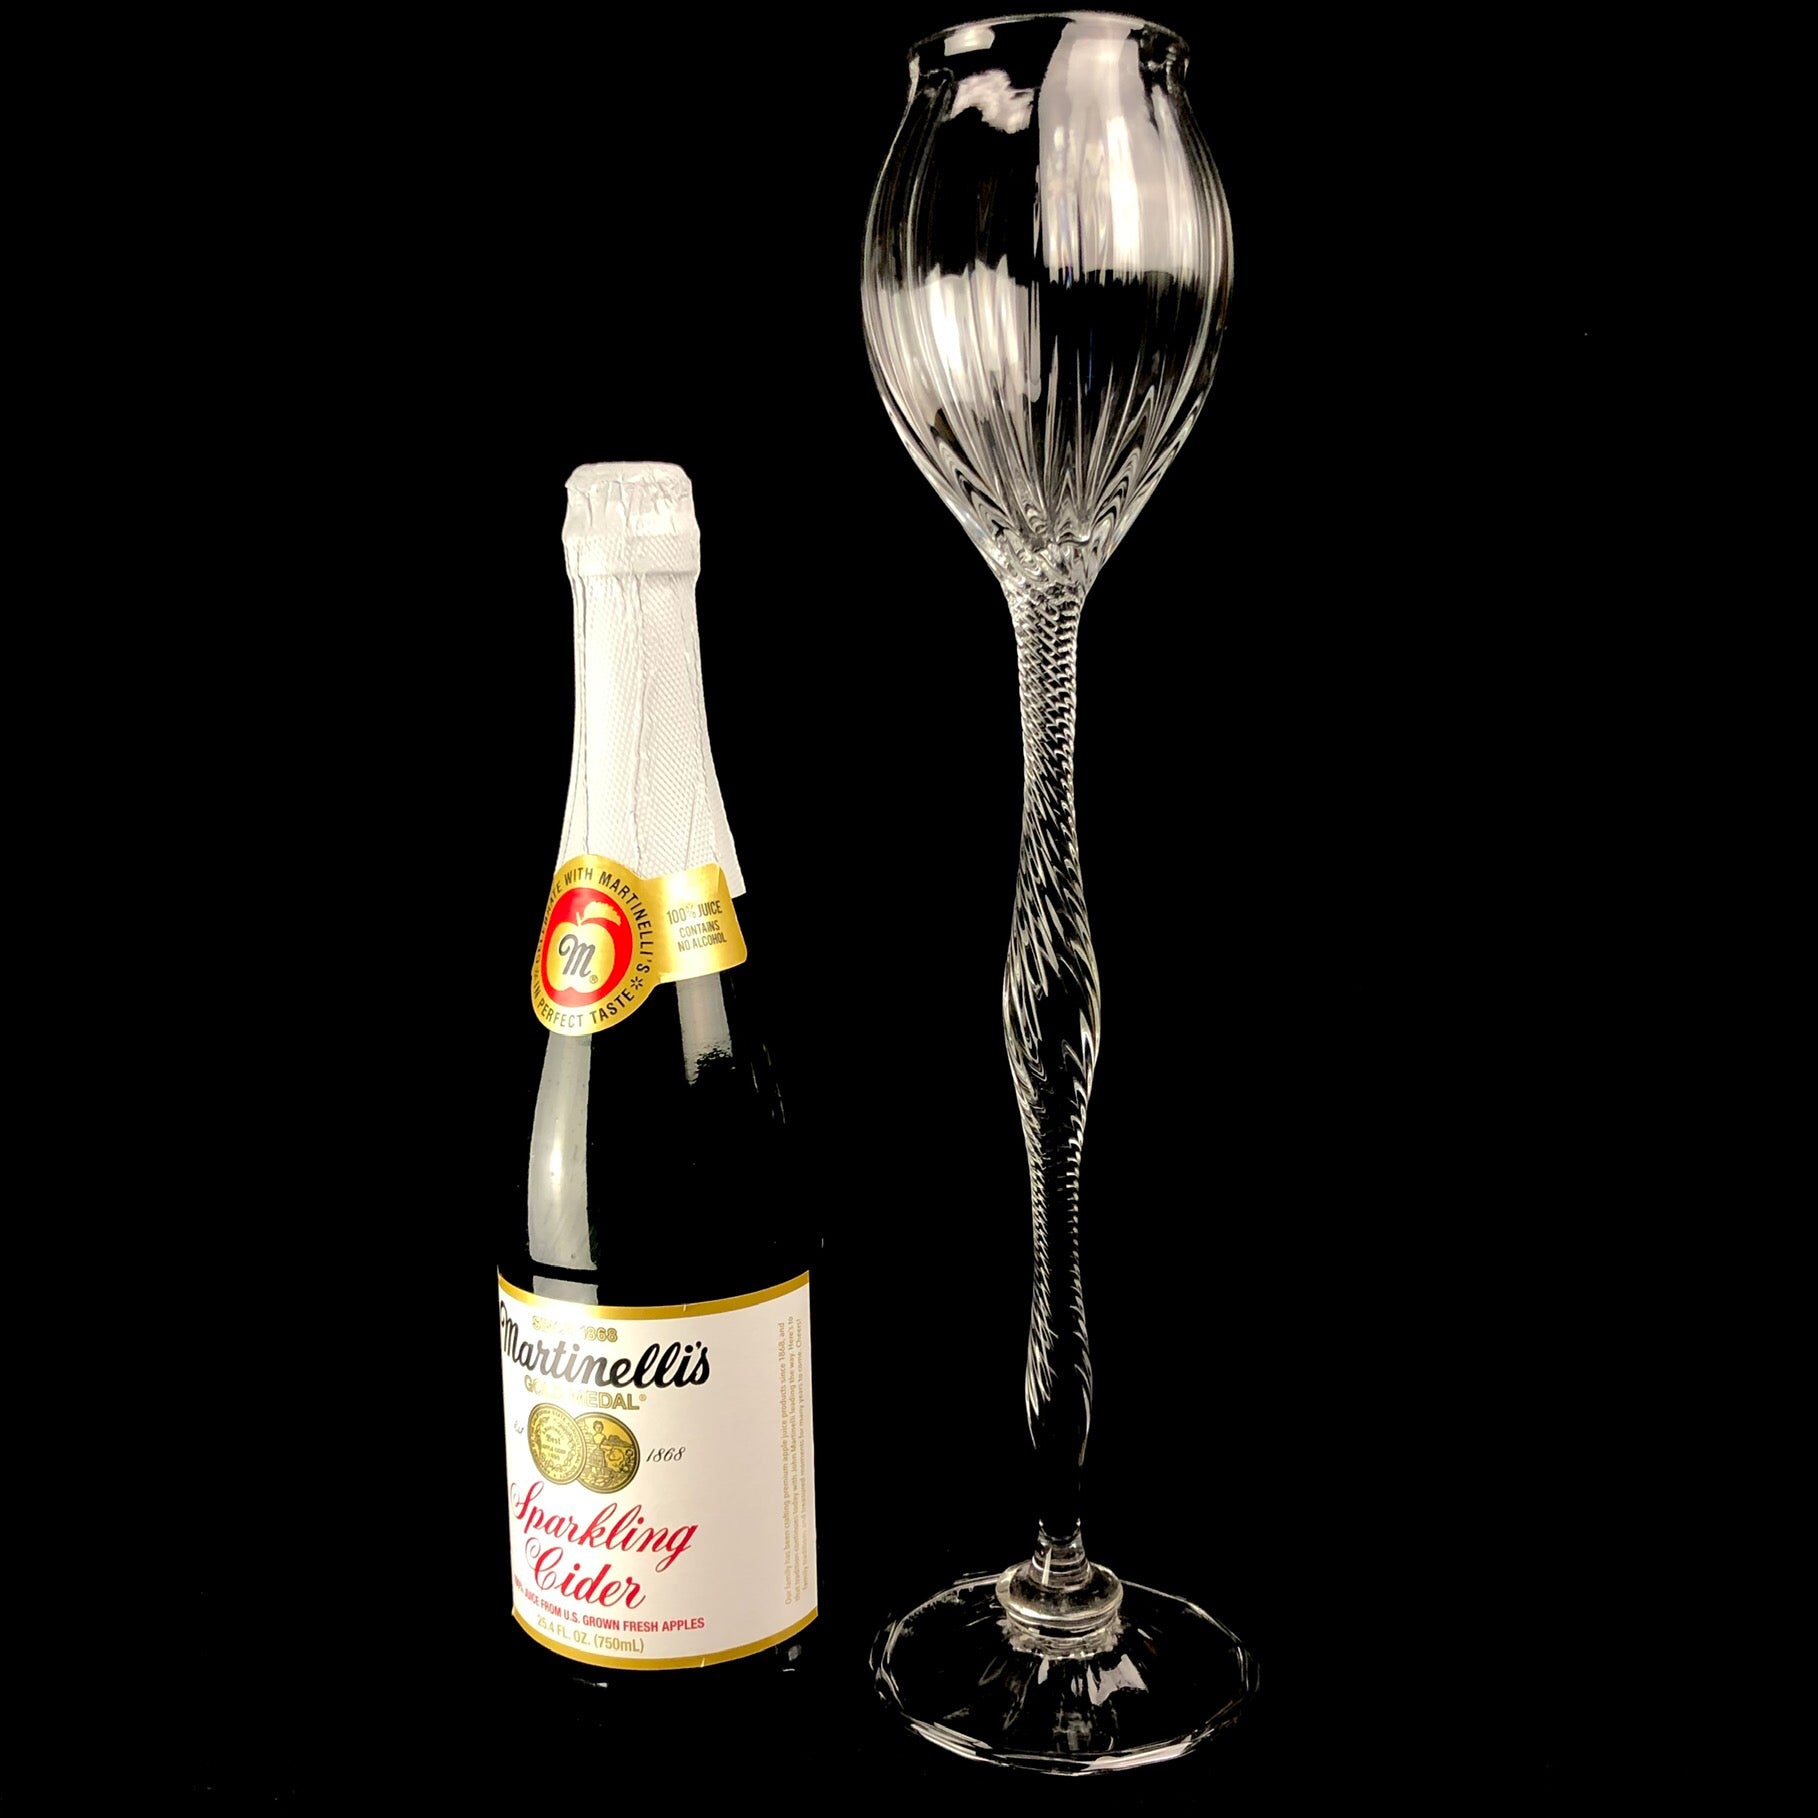 Oversized Glass Goblet shown next to a full size champagne bottle